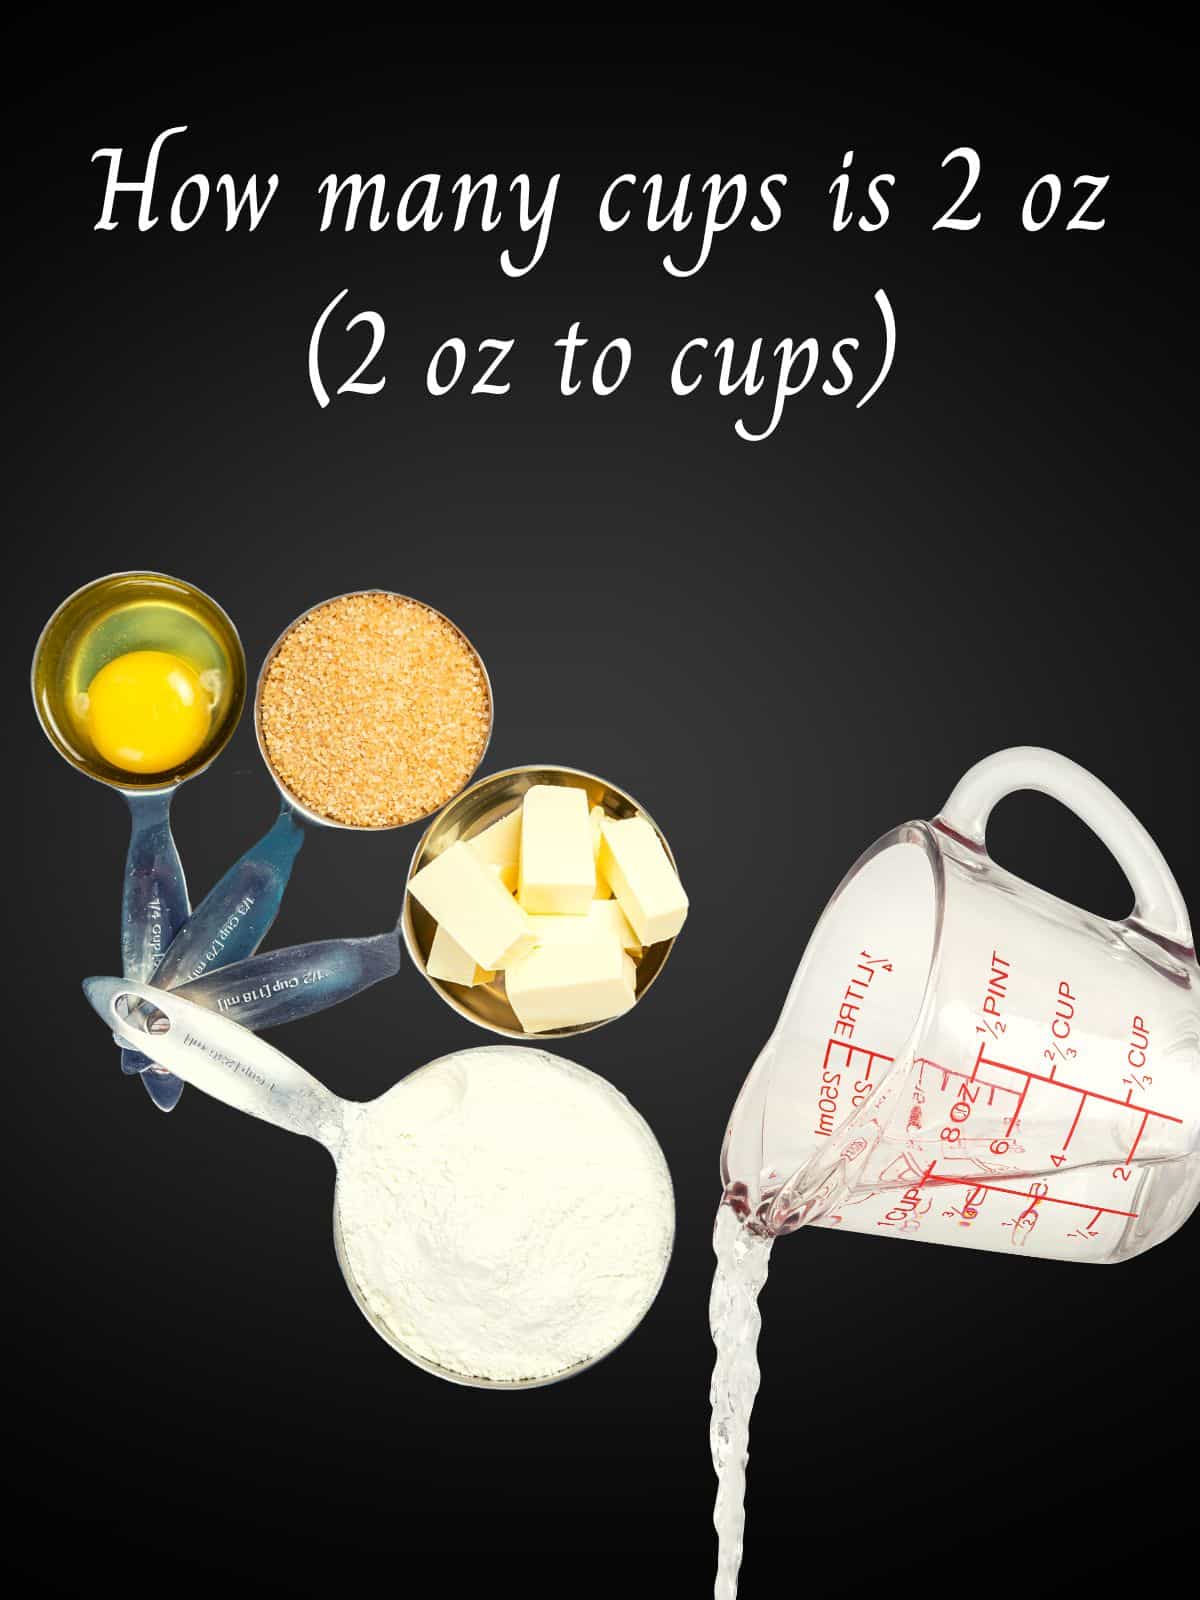 How many cups is 2 oz, 2 oz to cups